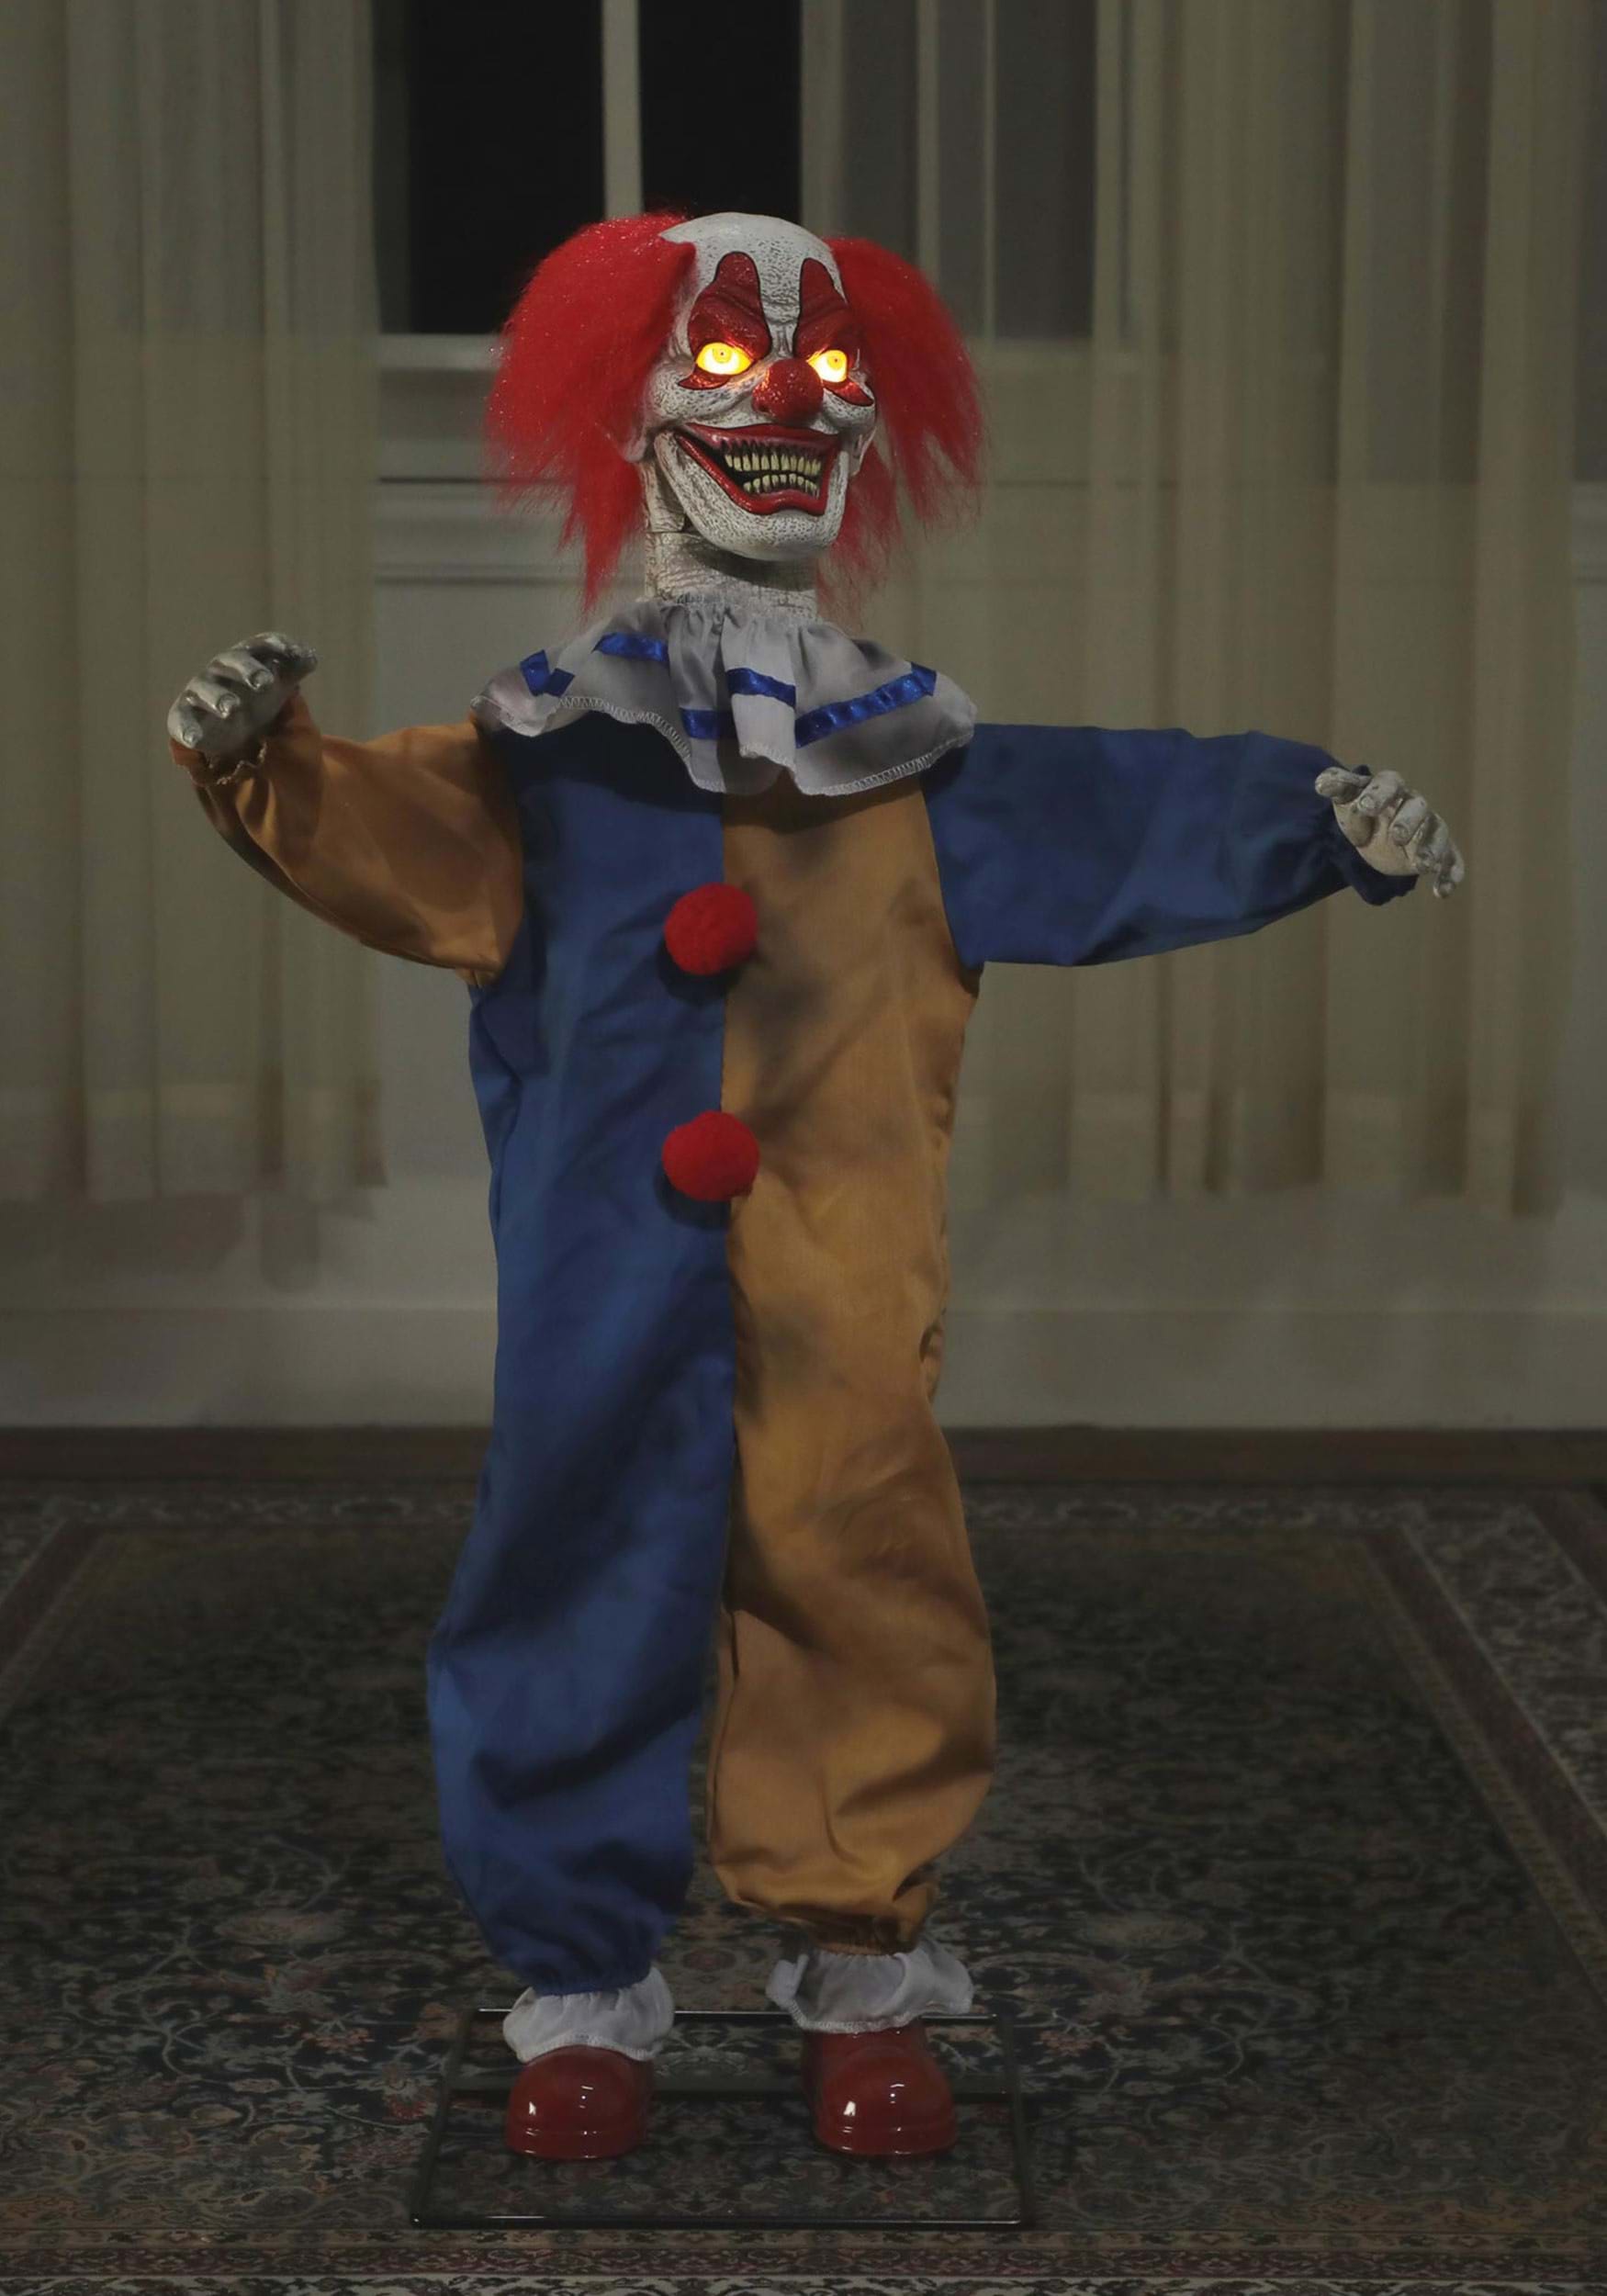 36 Inch Little Top Clown Animated Prop Clown Decorations